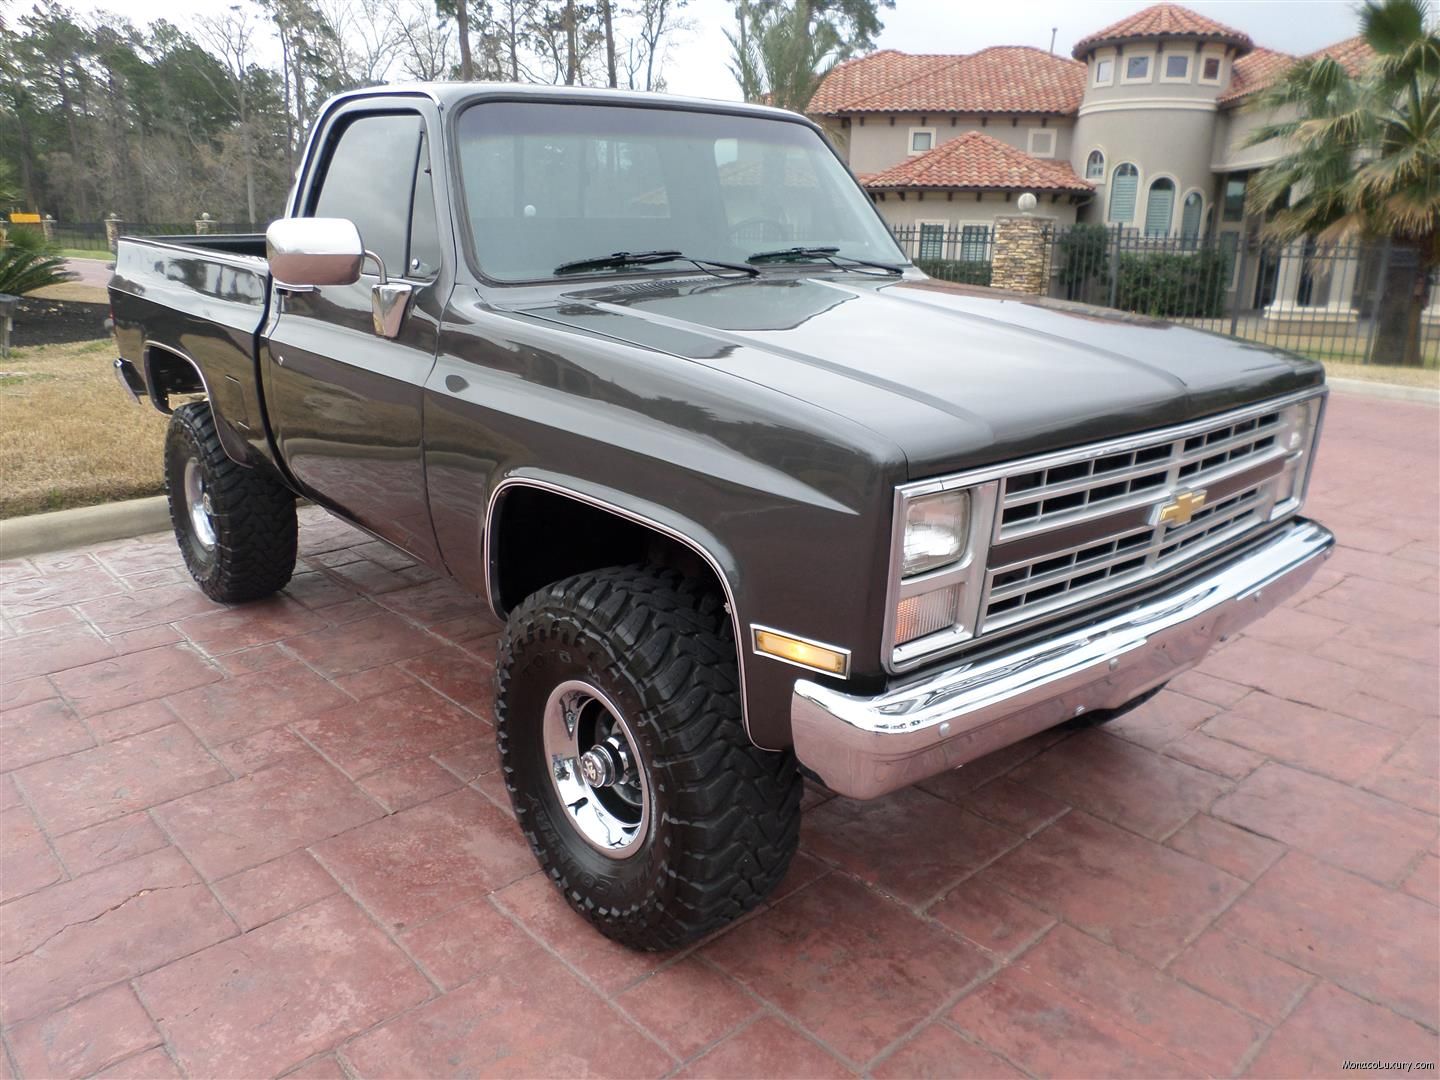 1985 Chevy 4x4 Short Bed Truck